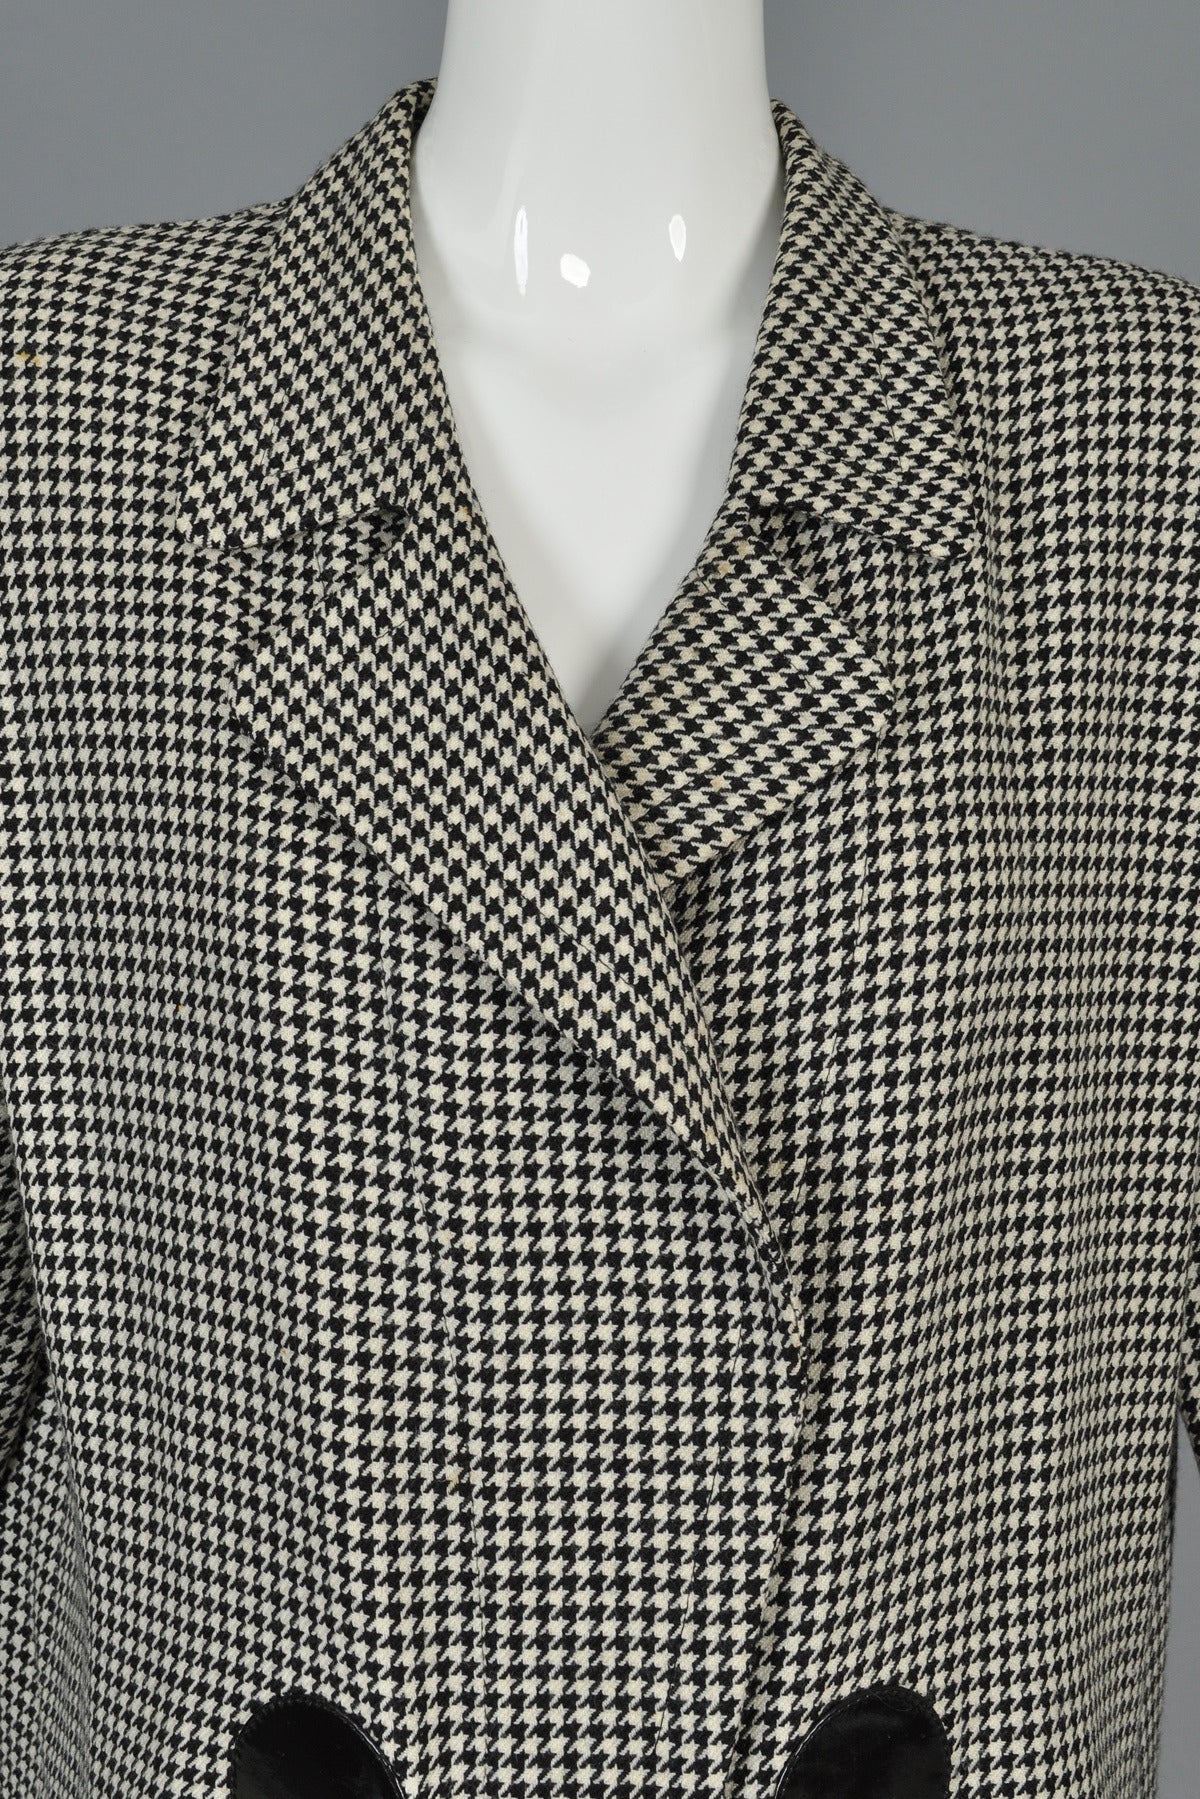 Gray F/W 93 Pierre Cardin Haute Couture Houndstooth Vinyl Tie Jacket For Sale